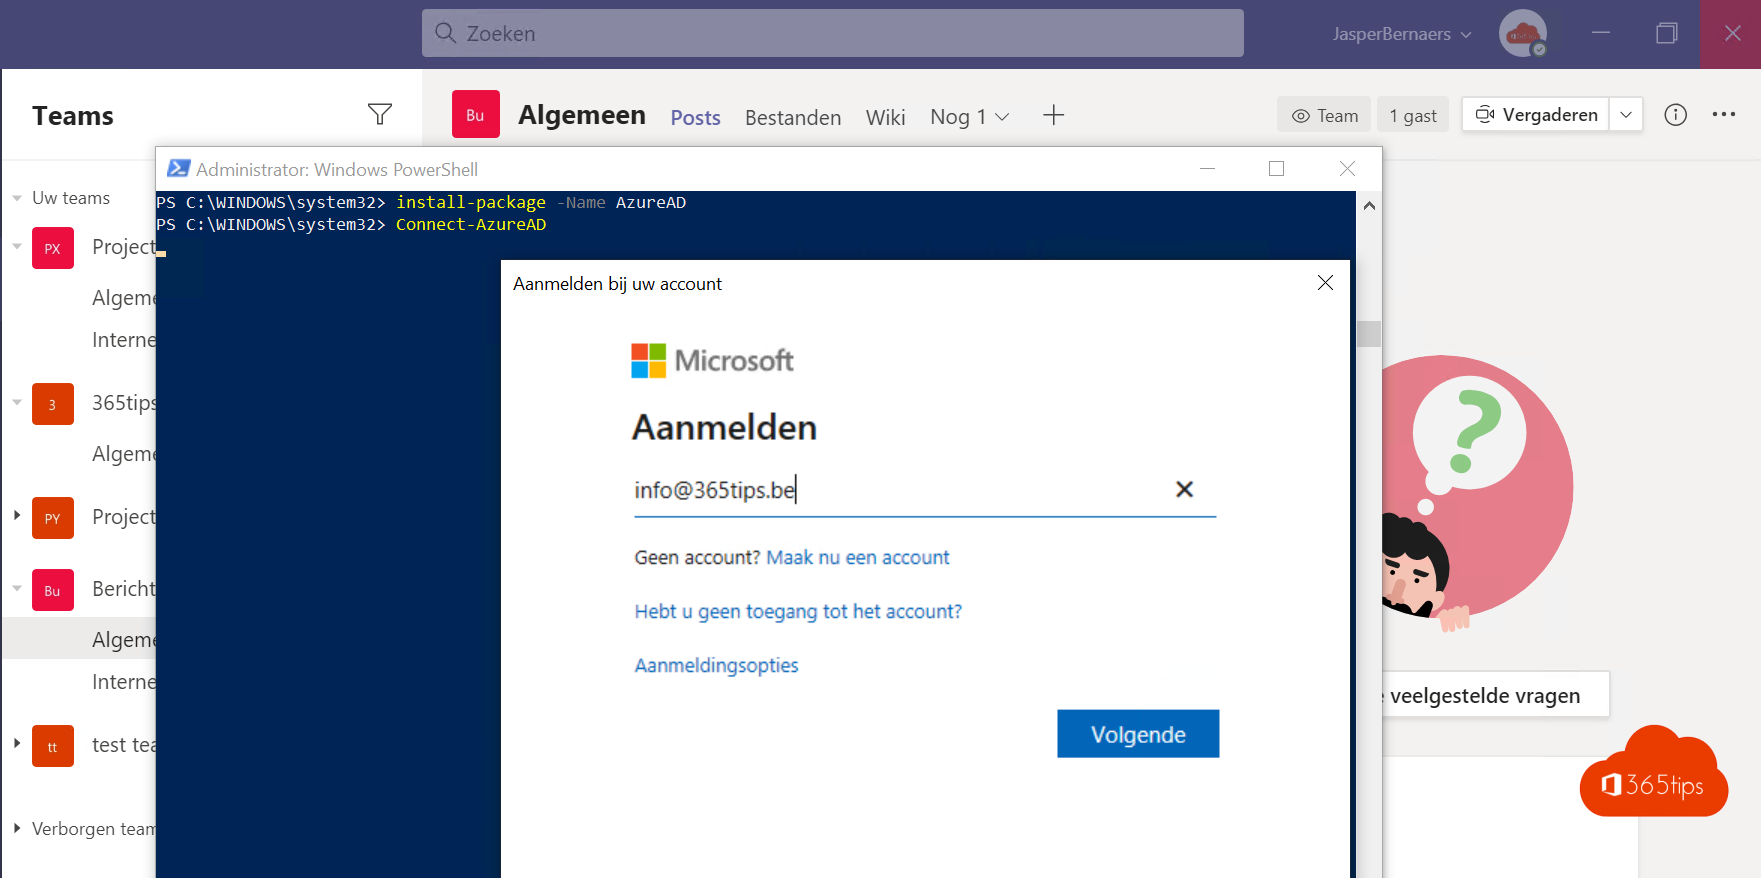 How to install Azure AD preview  module with PowerShell?